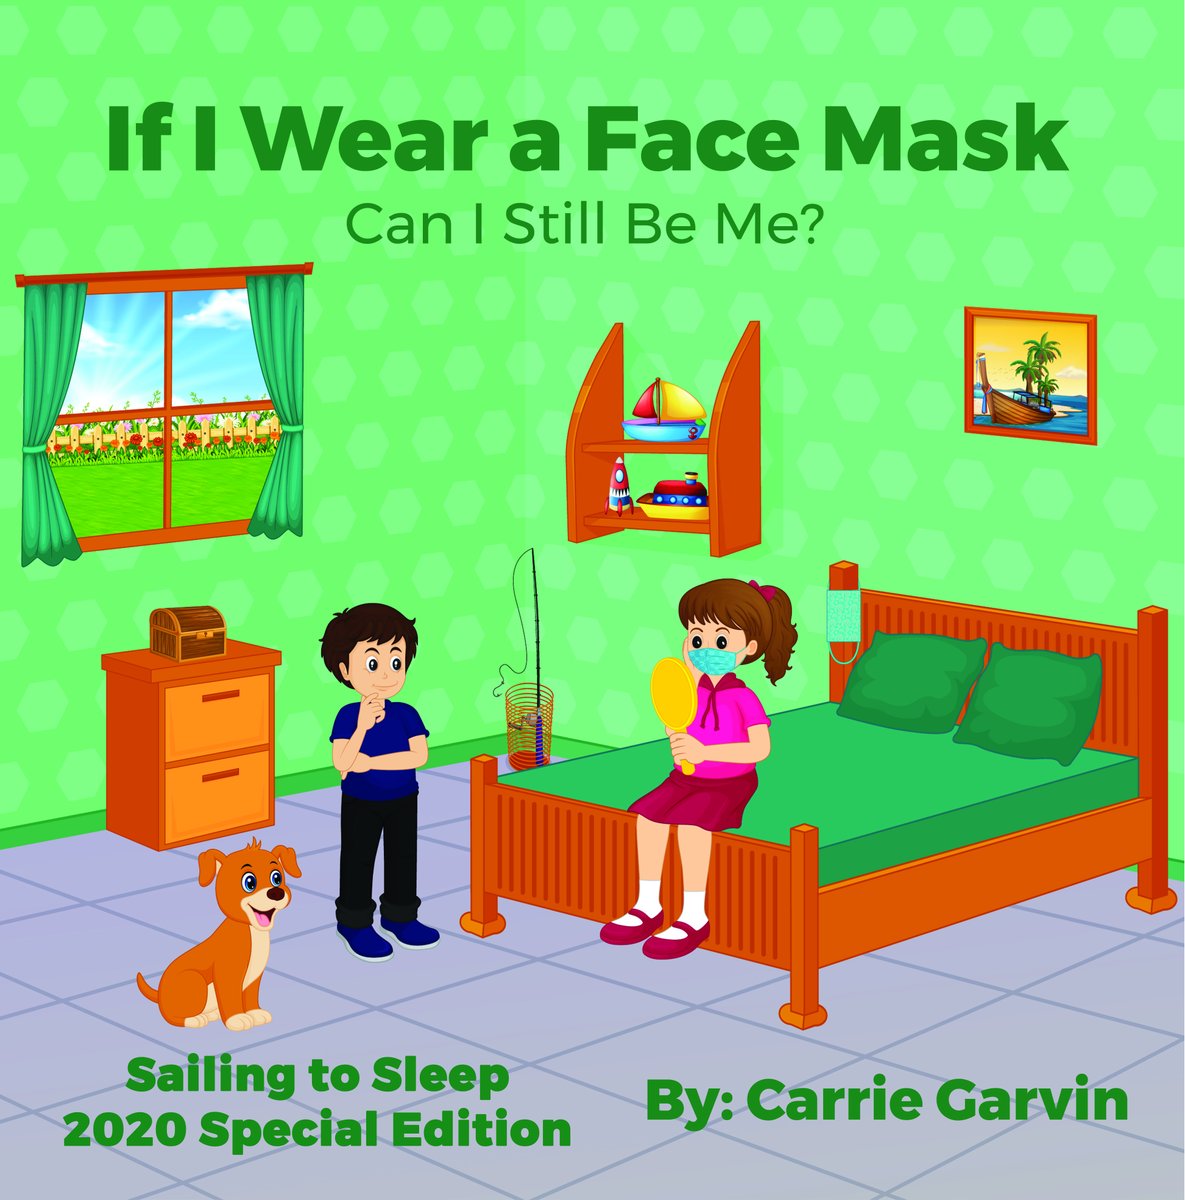 Sailing to Sleep-An interactive storybook collection By Carrie Garvin amzn.to/3iKDOqw If You Were an Elf If You Were a Pirate If I Wear a Face Mask-Can I Still Be Me? If You Were A Monster If You Were a Pirate If I Were a Mermaid #writingcommunity #ChildrensBooks #books